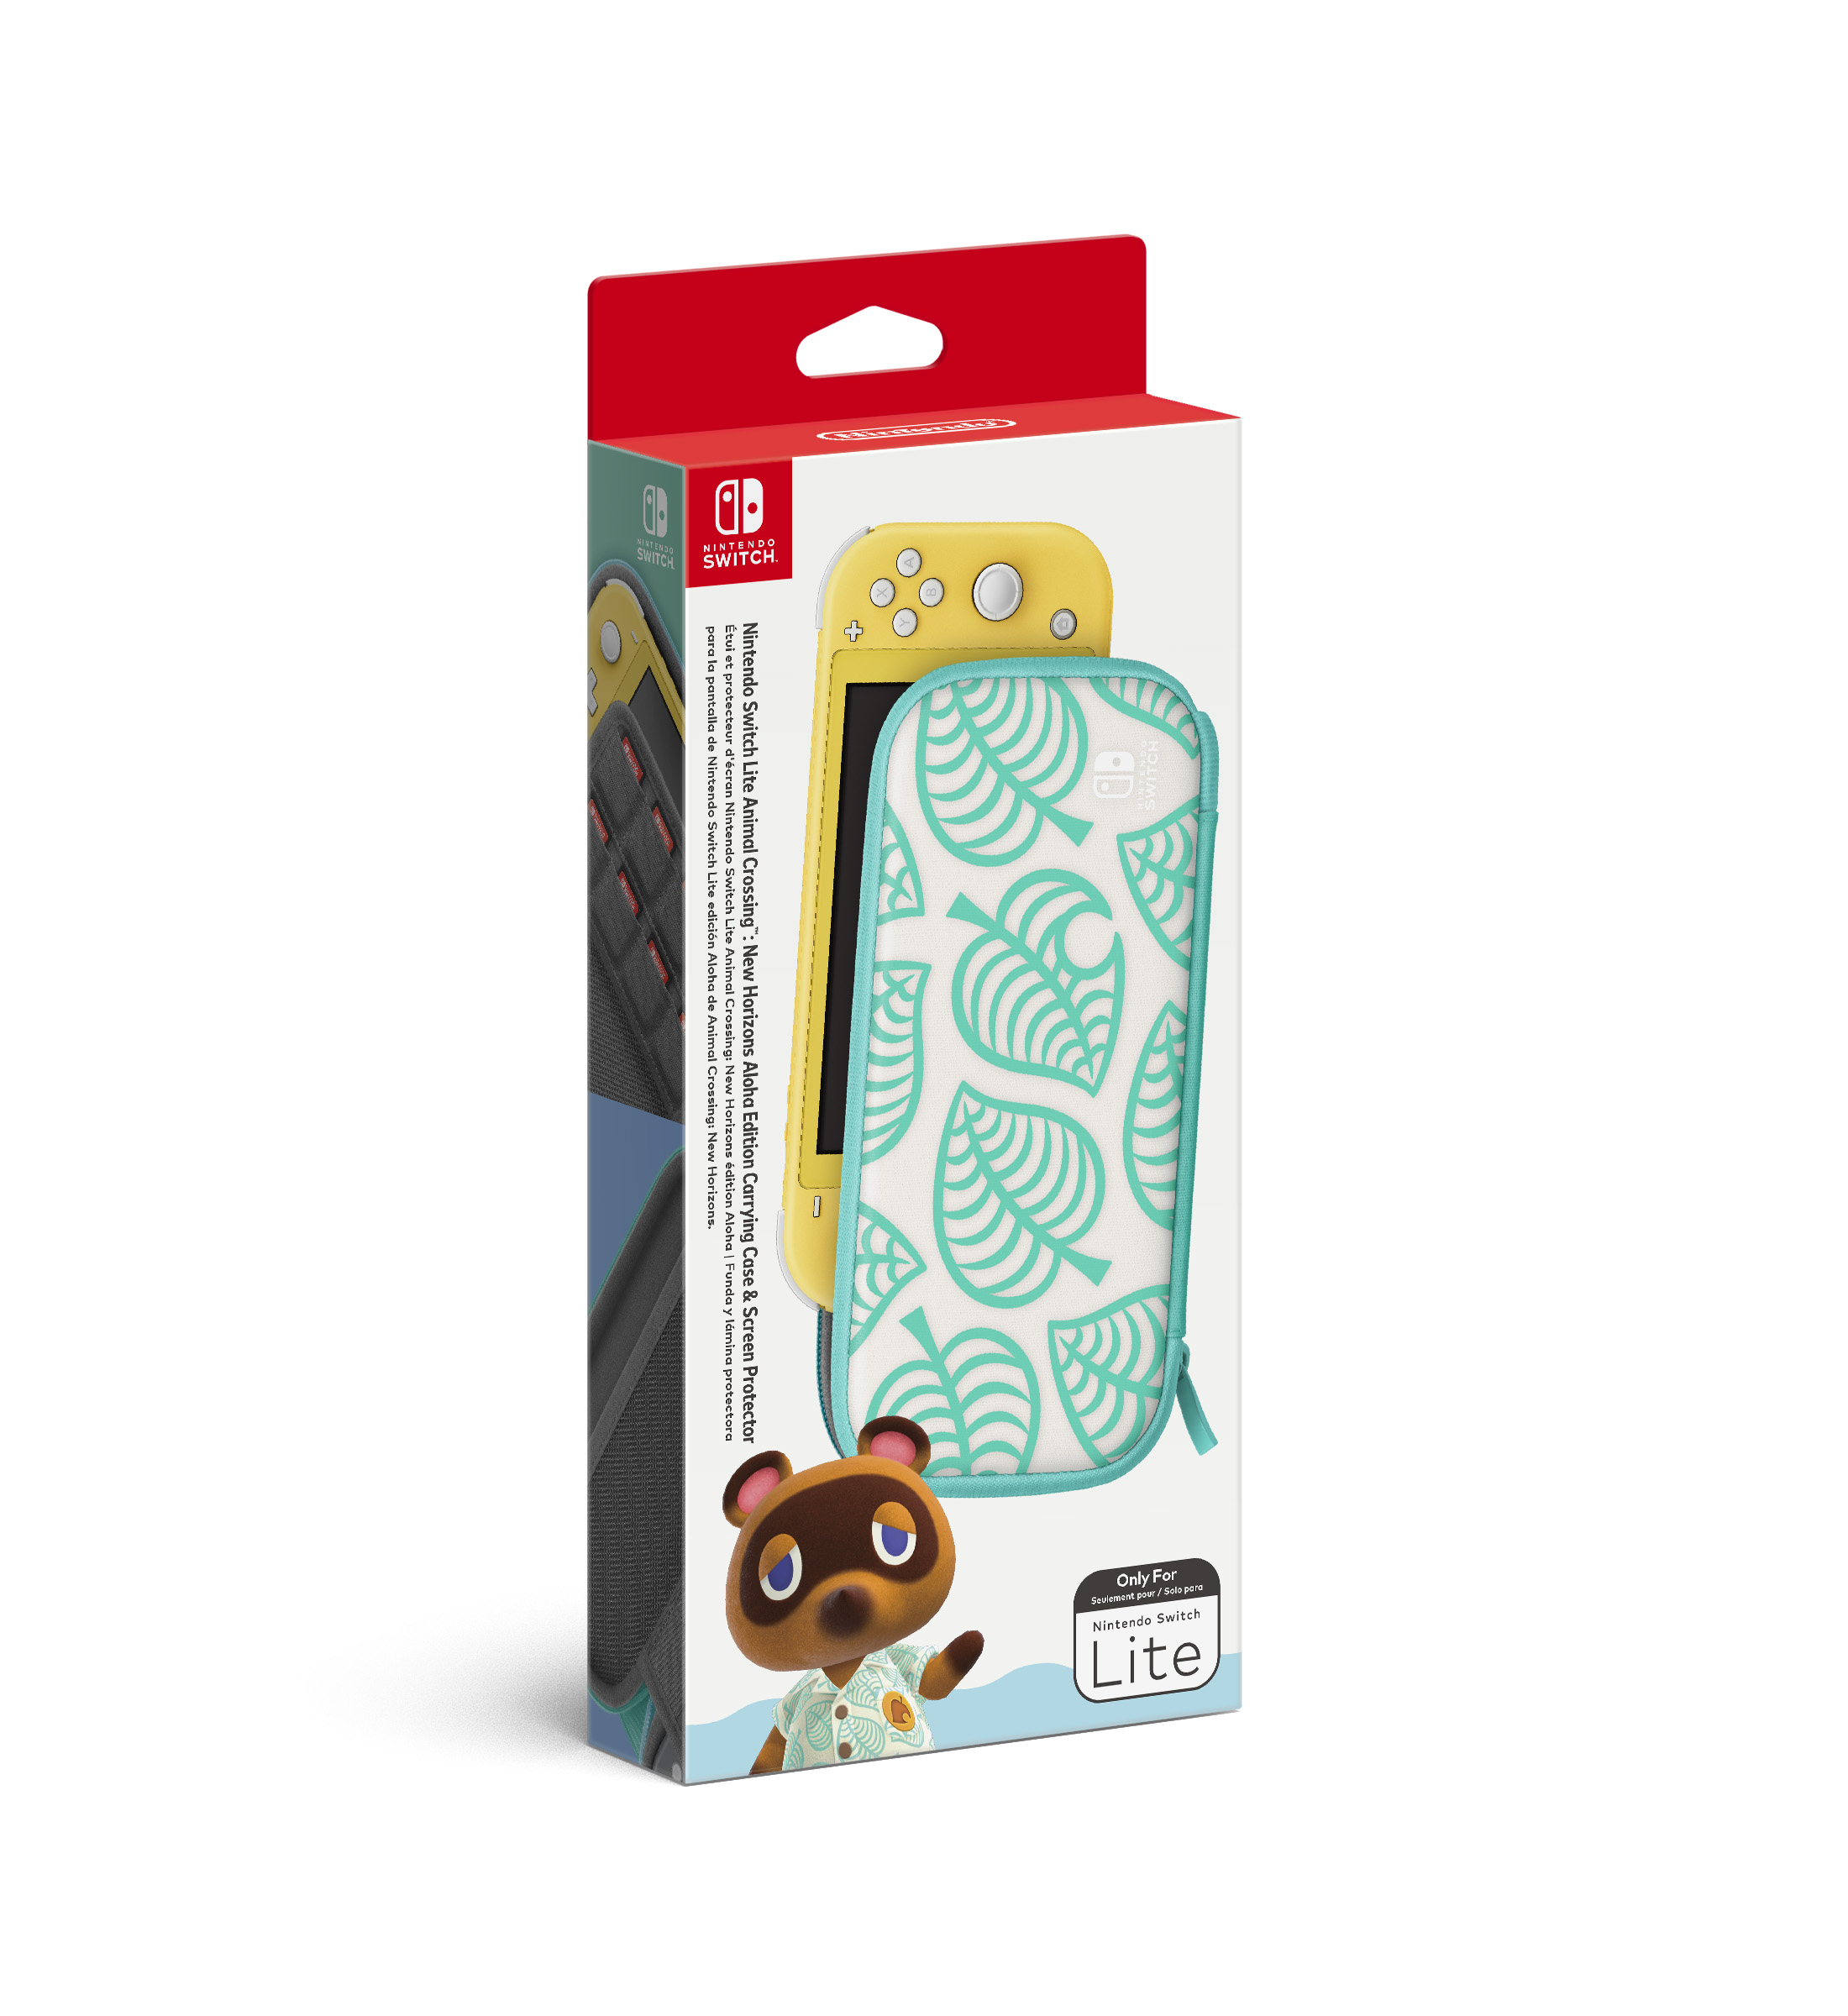 Nintendo Switch Lite Animal Crossing: New Horizons Aloha Edition Carrying Case & Screen Protector - image 2 of 2